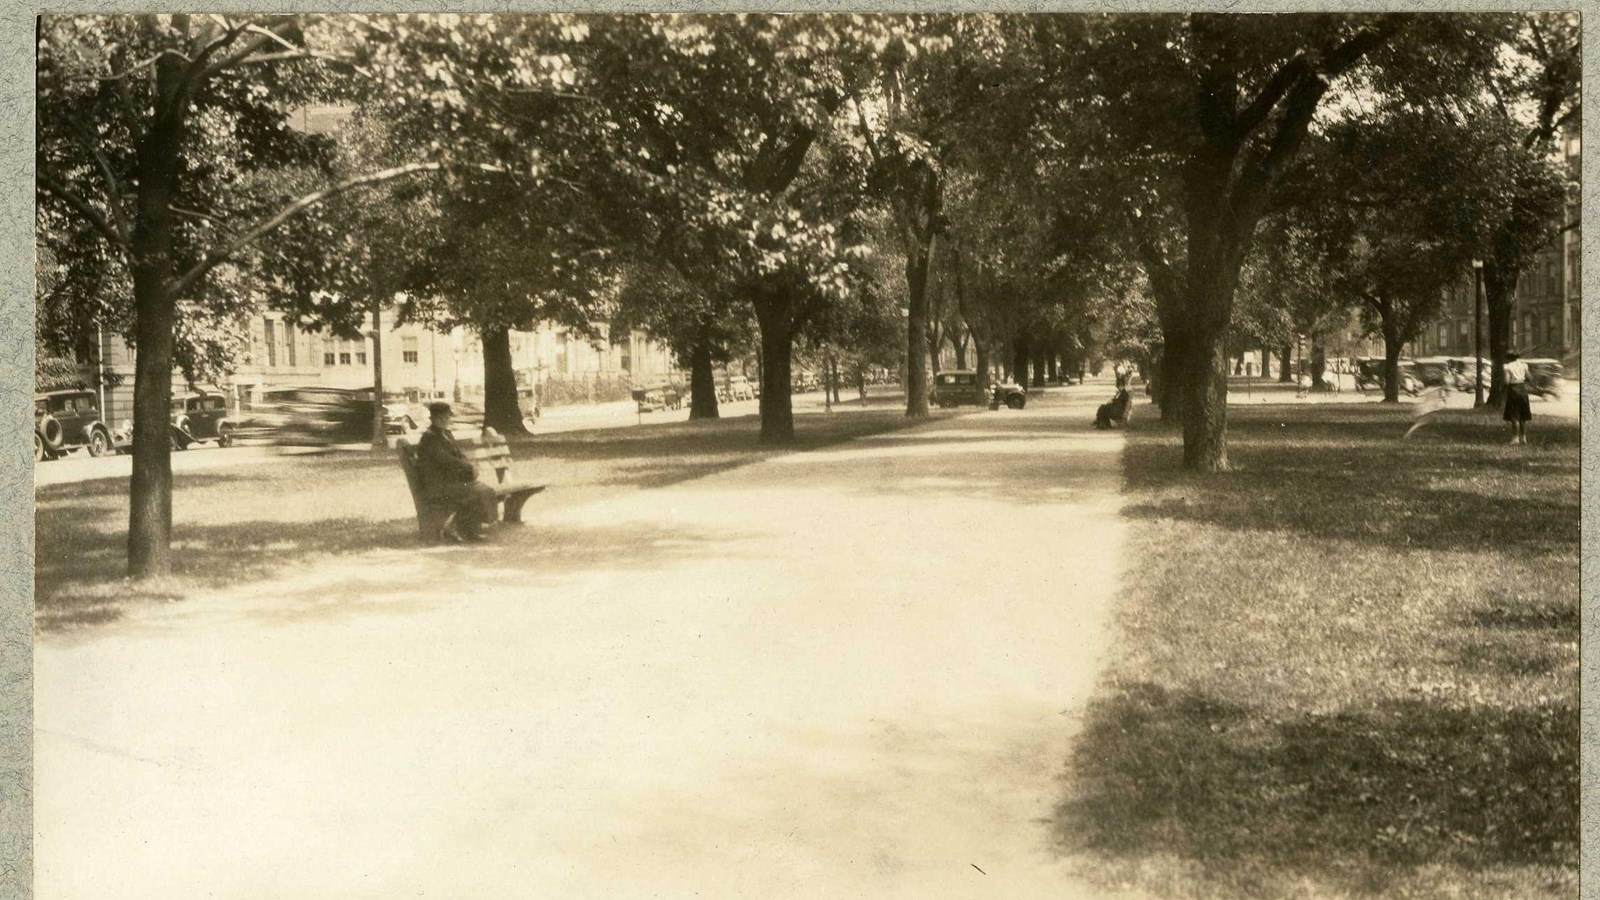 Black and white of path through grass lined with trees and benches on path with people on it